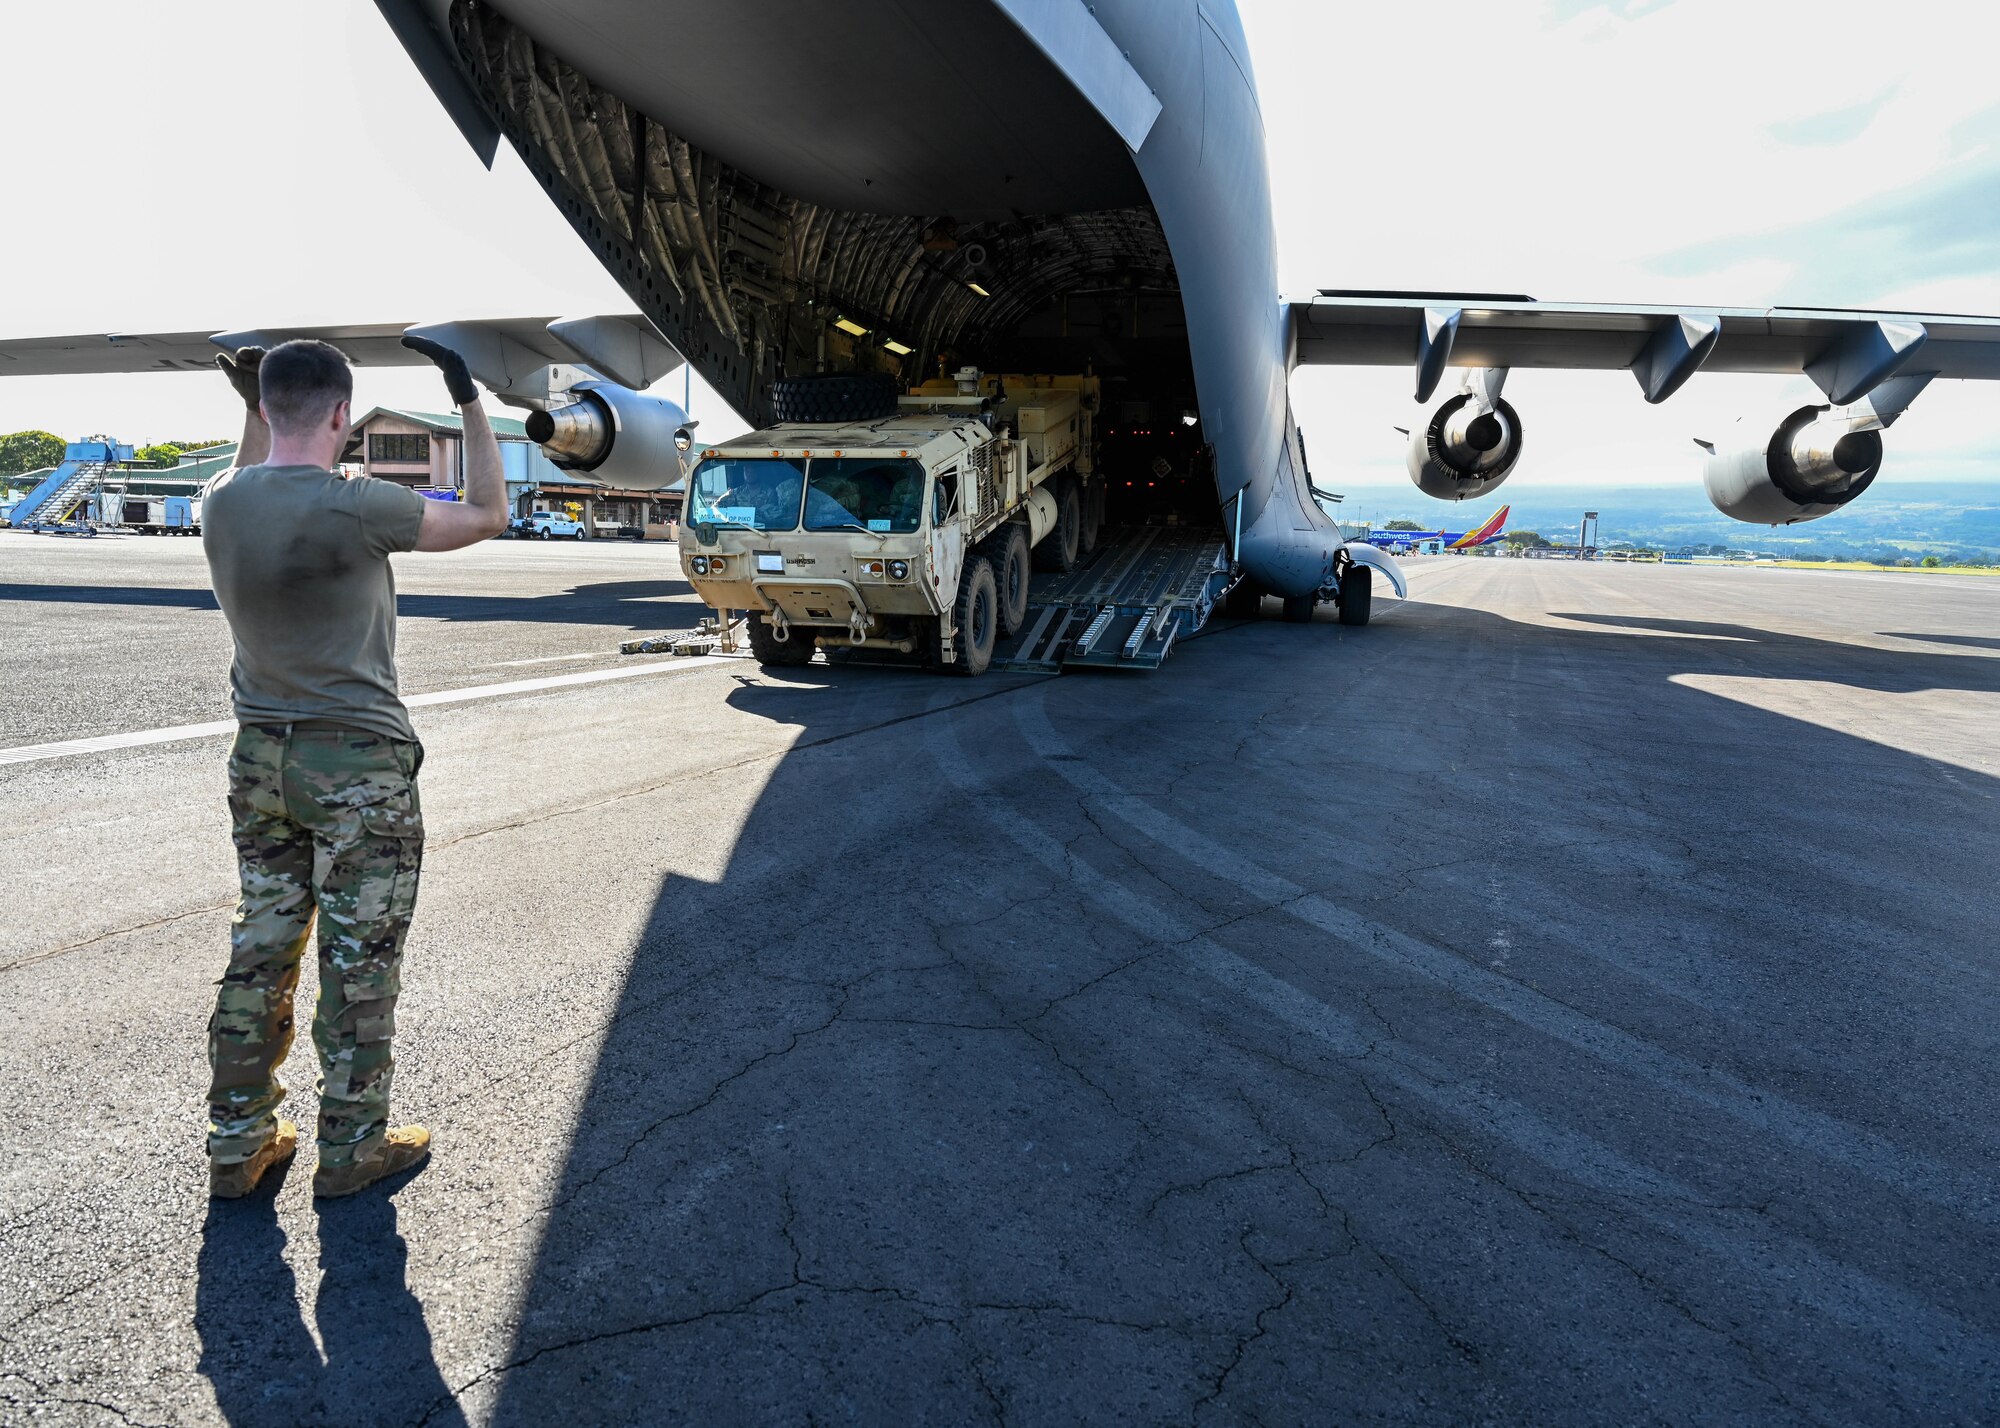 Senior Airman Andrew Girard, 535th Airlift Squadron C-17 Globemaster III loadmaster, directs a 25th Infantry Division light-medium tactical vehicle off of a C-17 Globemaster III at Hilo, Hawaii, Jan. 10, 2022. Equipment was transported to the Island of Hawaii for a gunnery sustainment exercise that will allow Soldiers to qualify on several weapon systems. (U.S. Air Force photo by Senior Airman Zoie Cox)